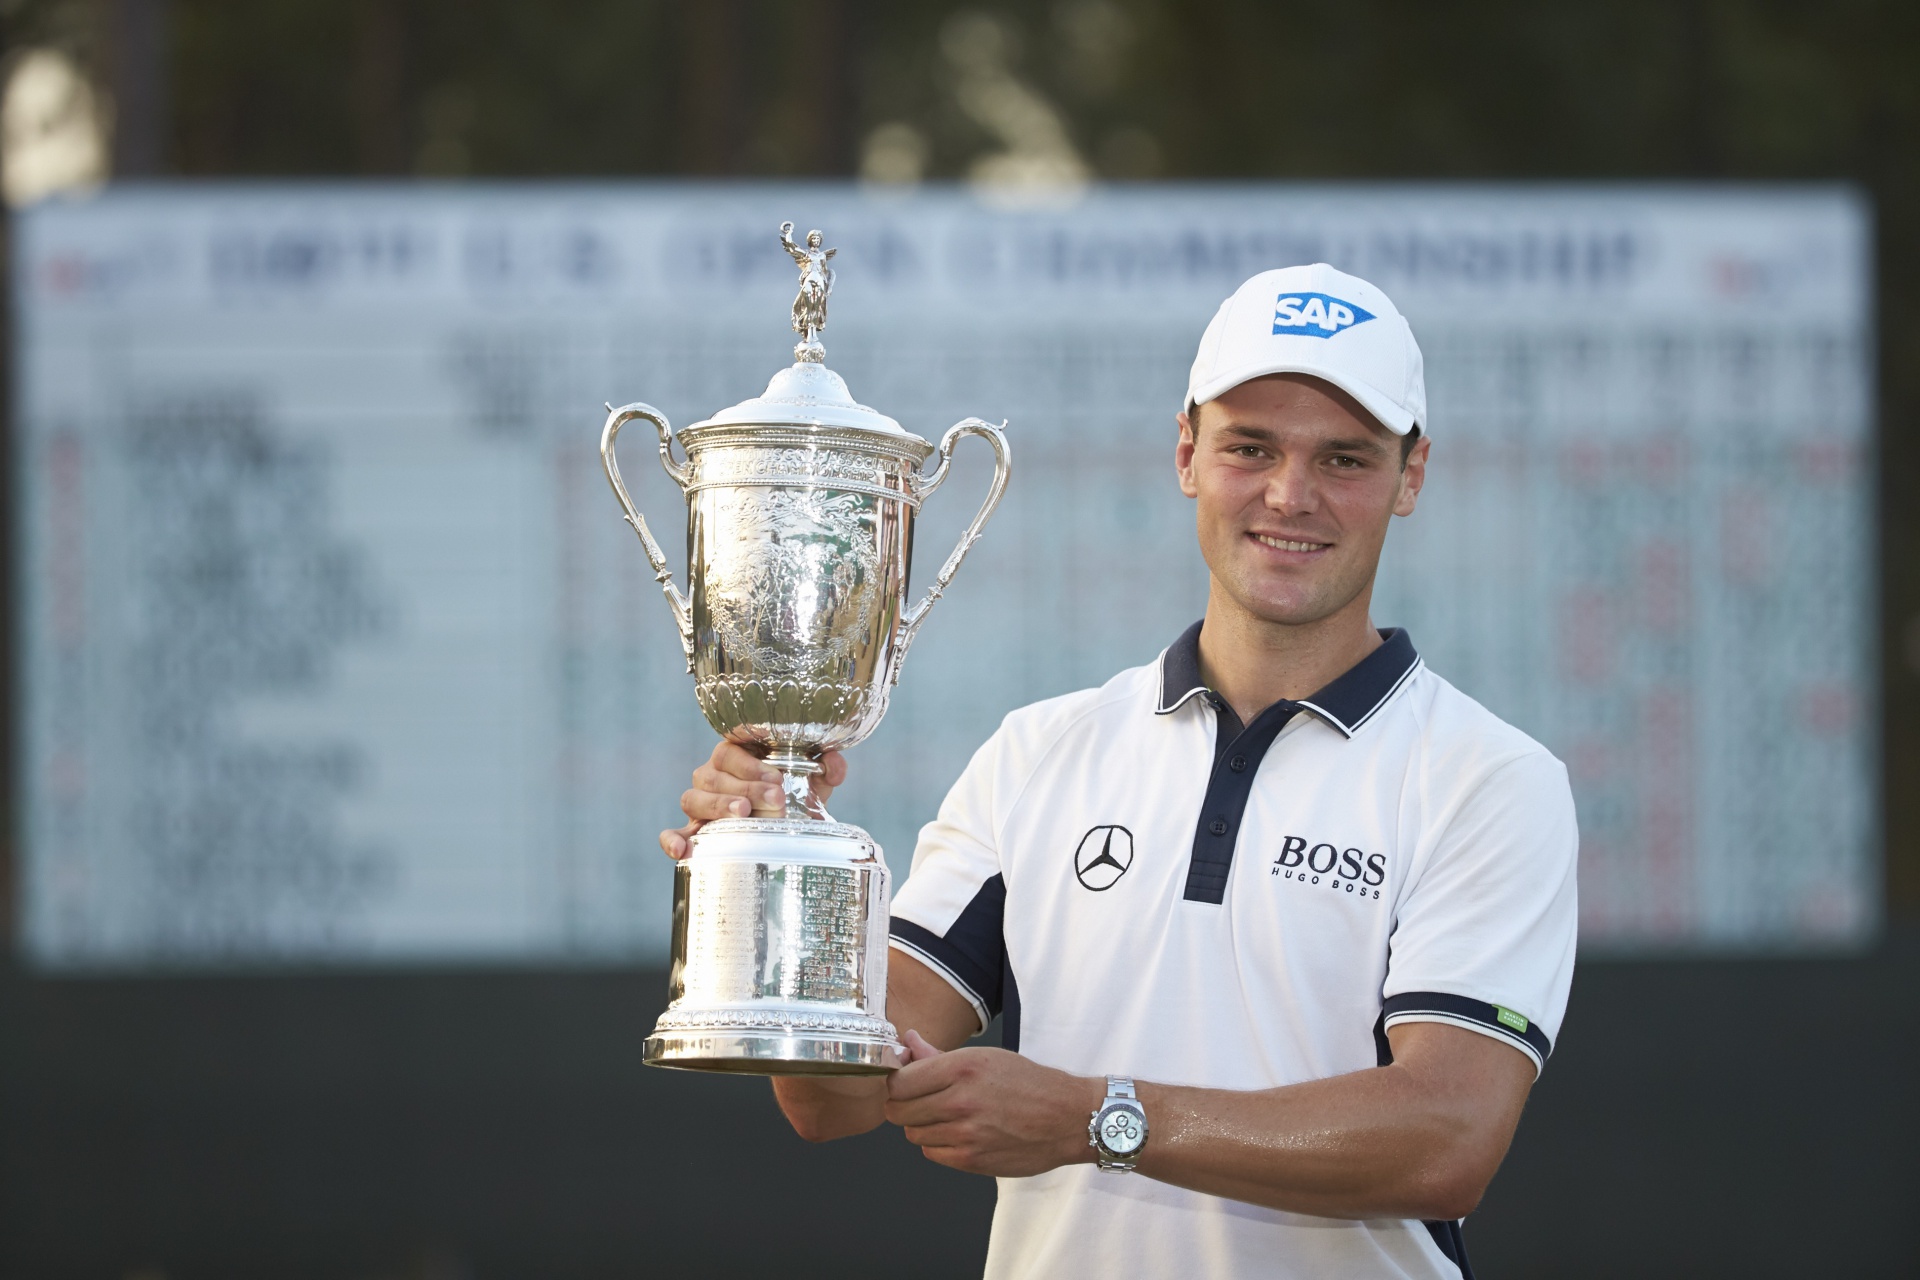 ©Getty_Images_Al_Tielemans_ROLEX_TESTIMONEE_MARTIN_KAYMER_WITH_THE_TROPHY_AFTER_WINNING_THE_2014_U.S._OPEN.jpg (416 KB)